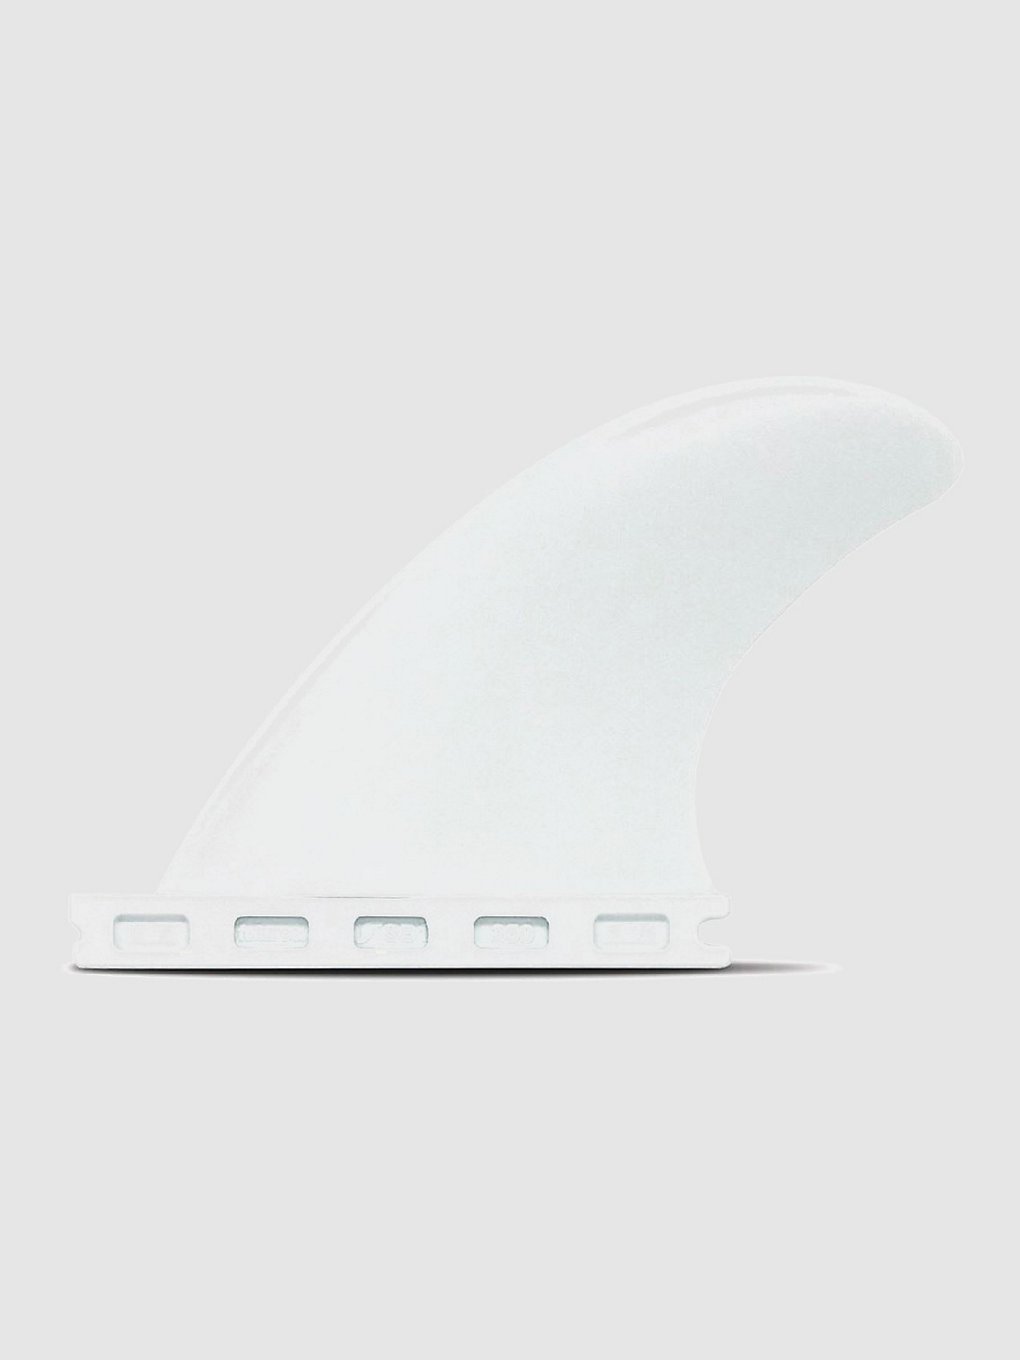 Image of Futures Fins Sidebites SB1 3.5 Thermotech Pinne Set bianco